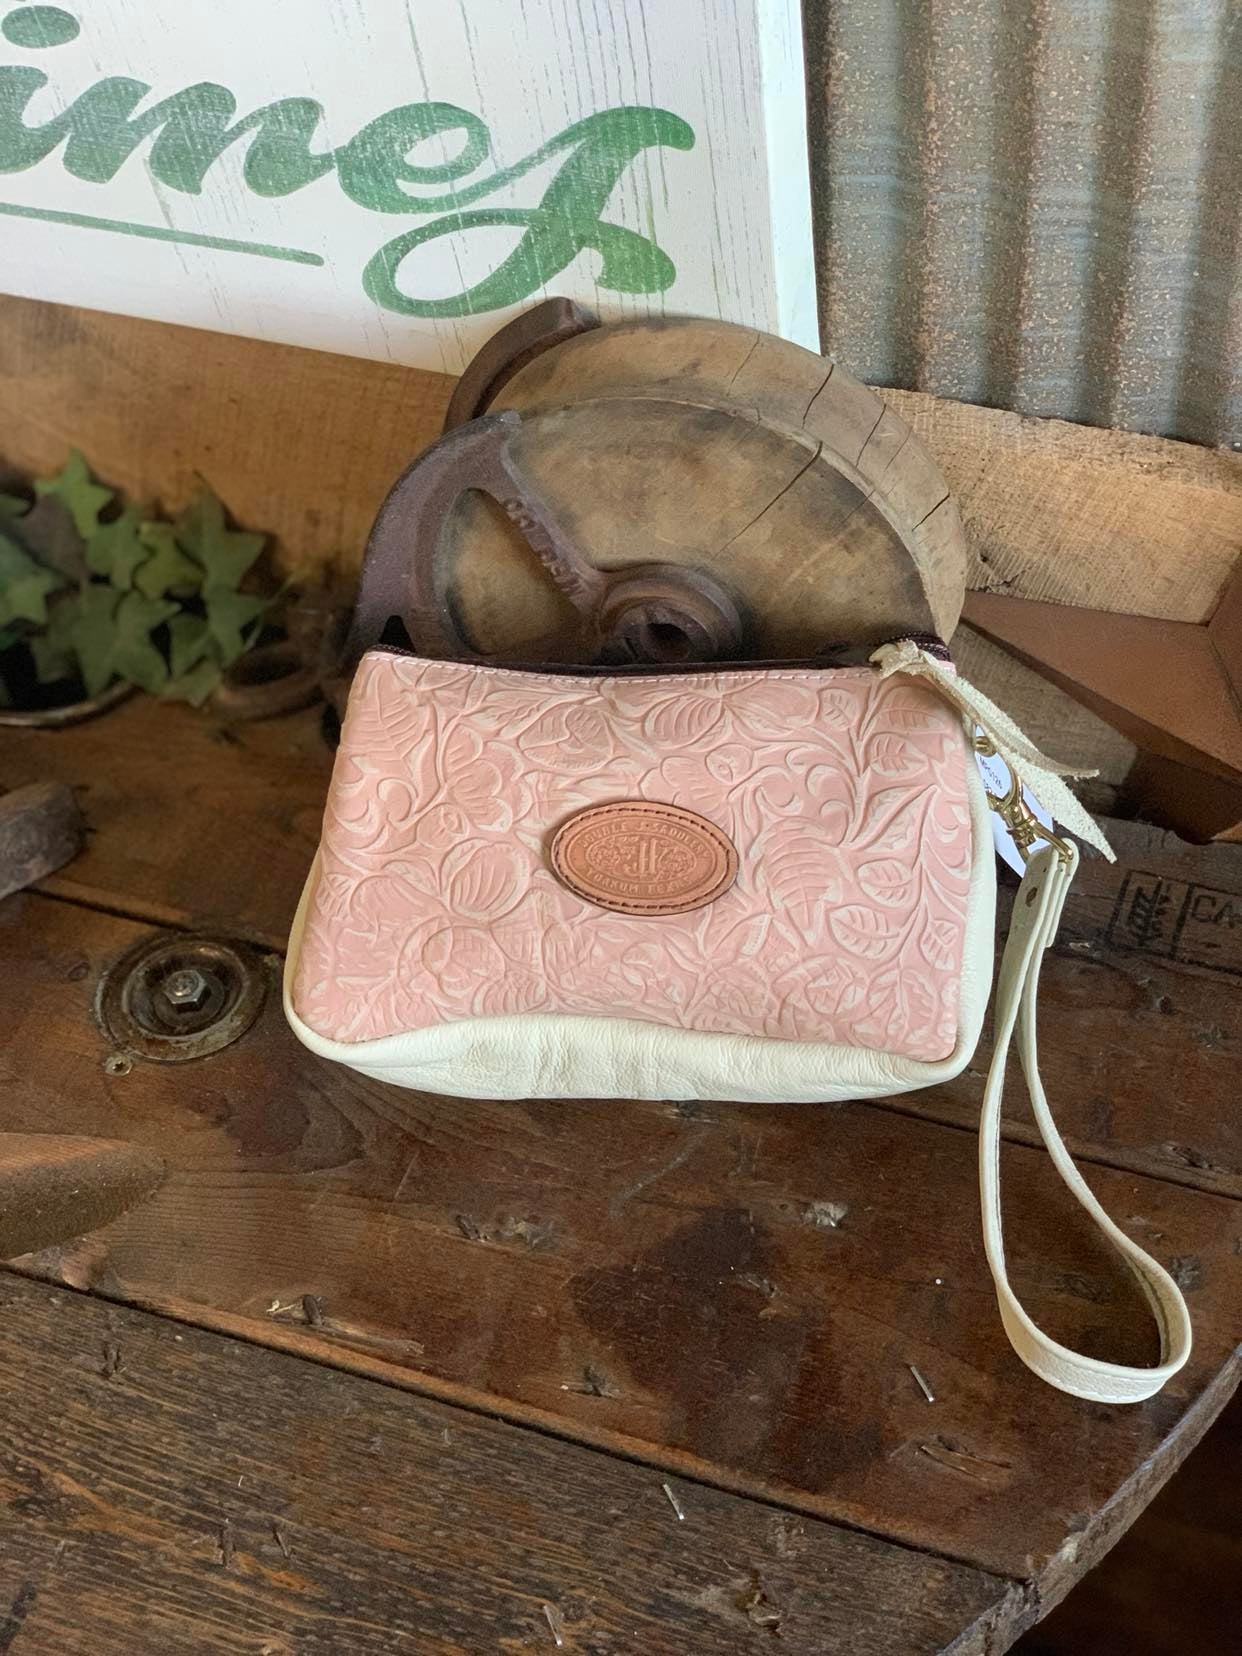 Make Up Pouch with Gasset-Handbags-DOUBLE J SADDLERY-Lucky J Boots & More, Women's, Men's, & Kids Western Store Located in Carthage, MO